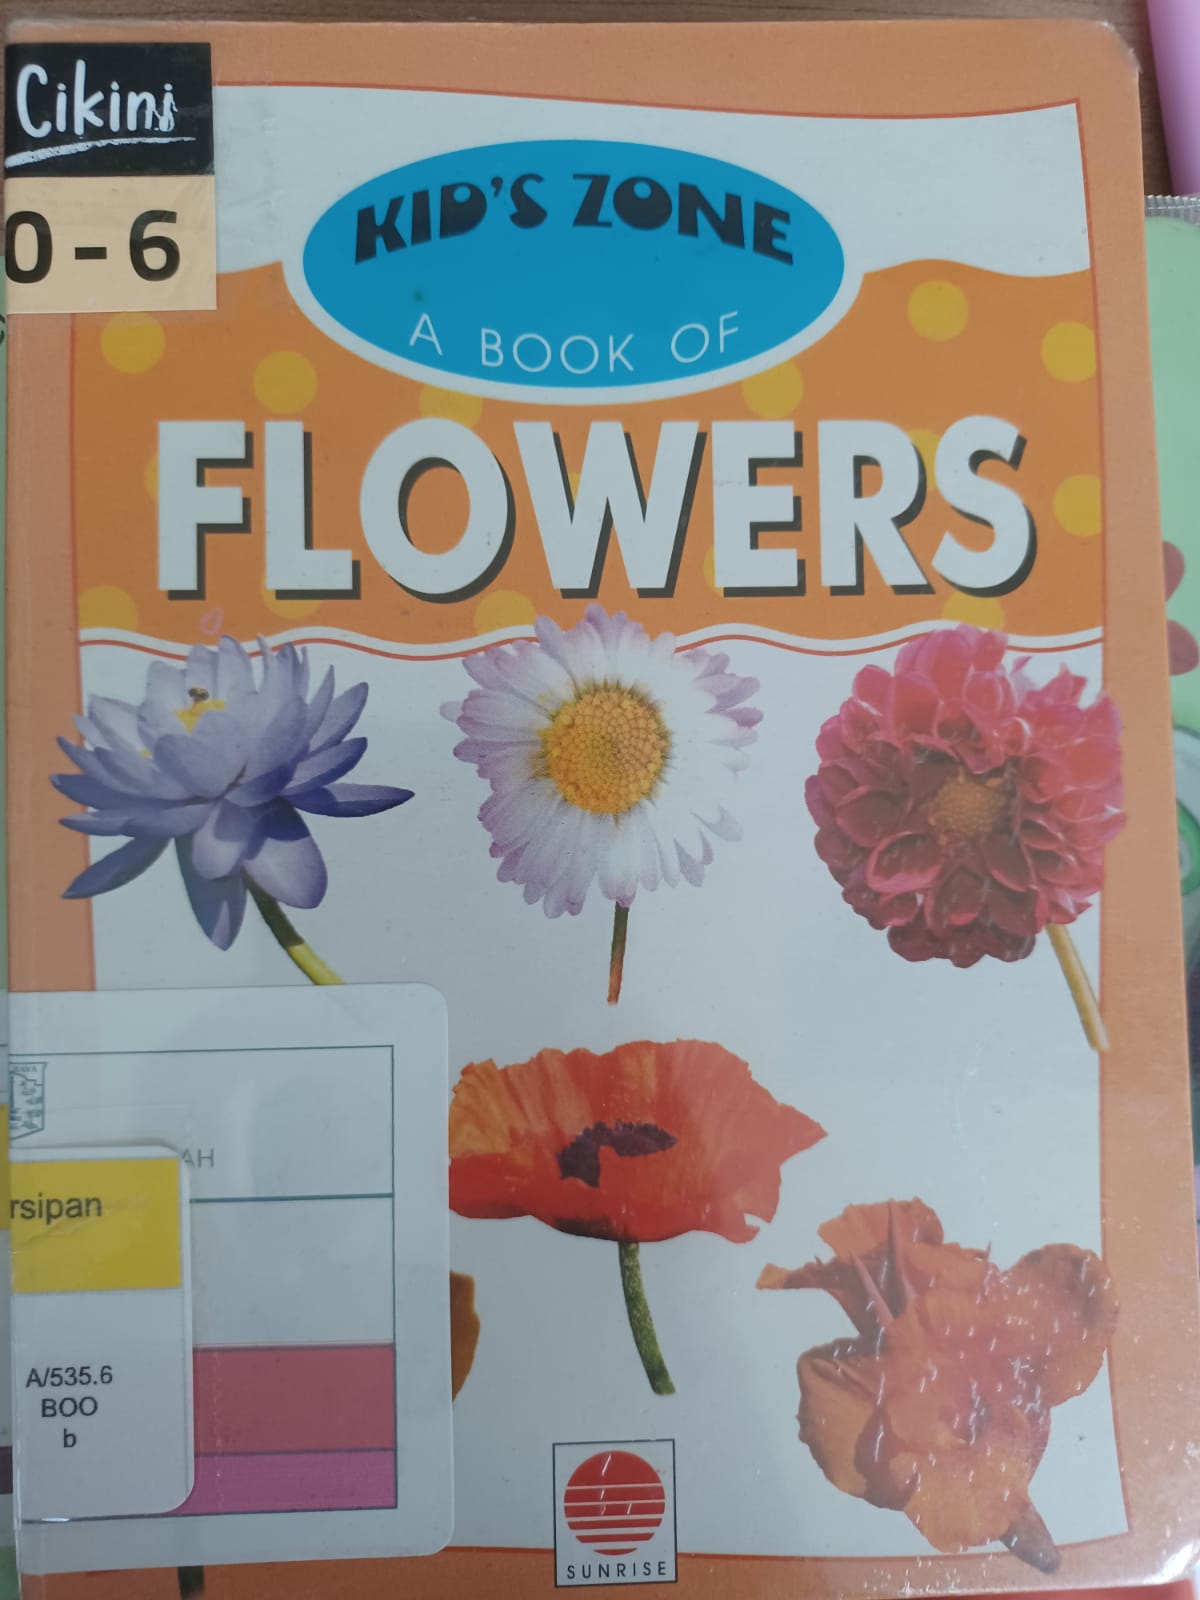 Kid's zone a book of flowers